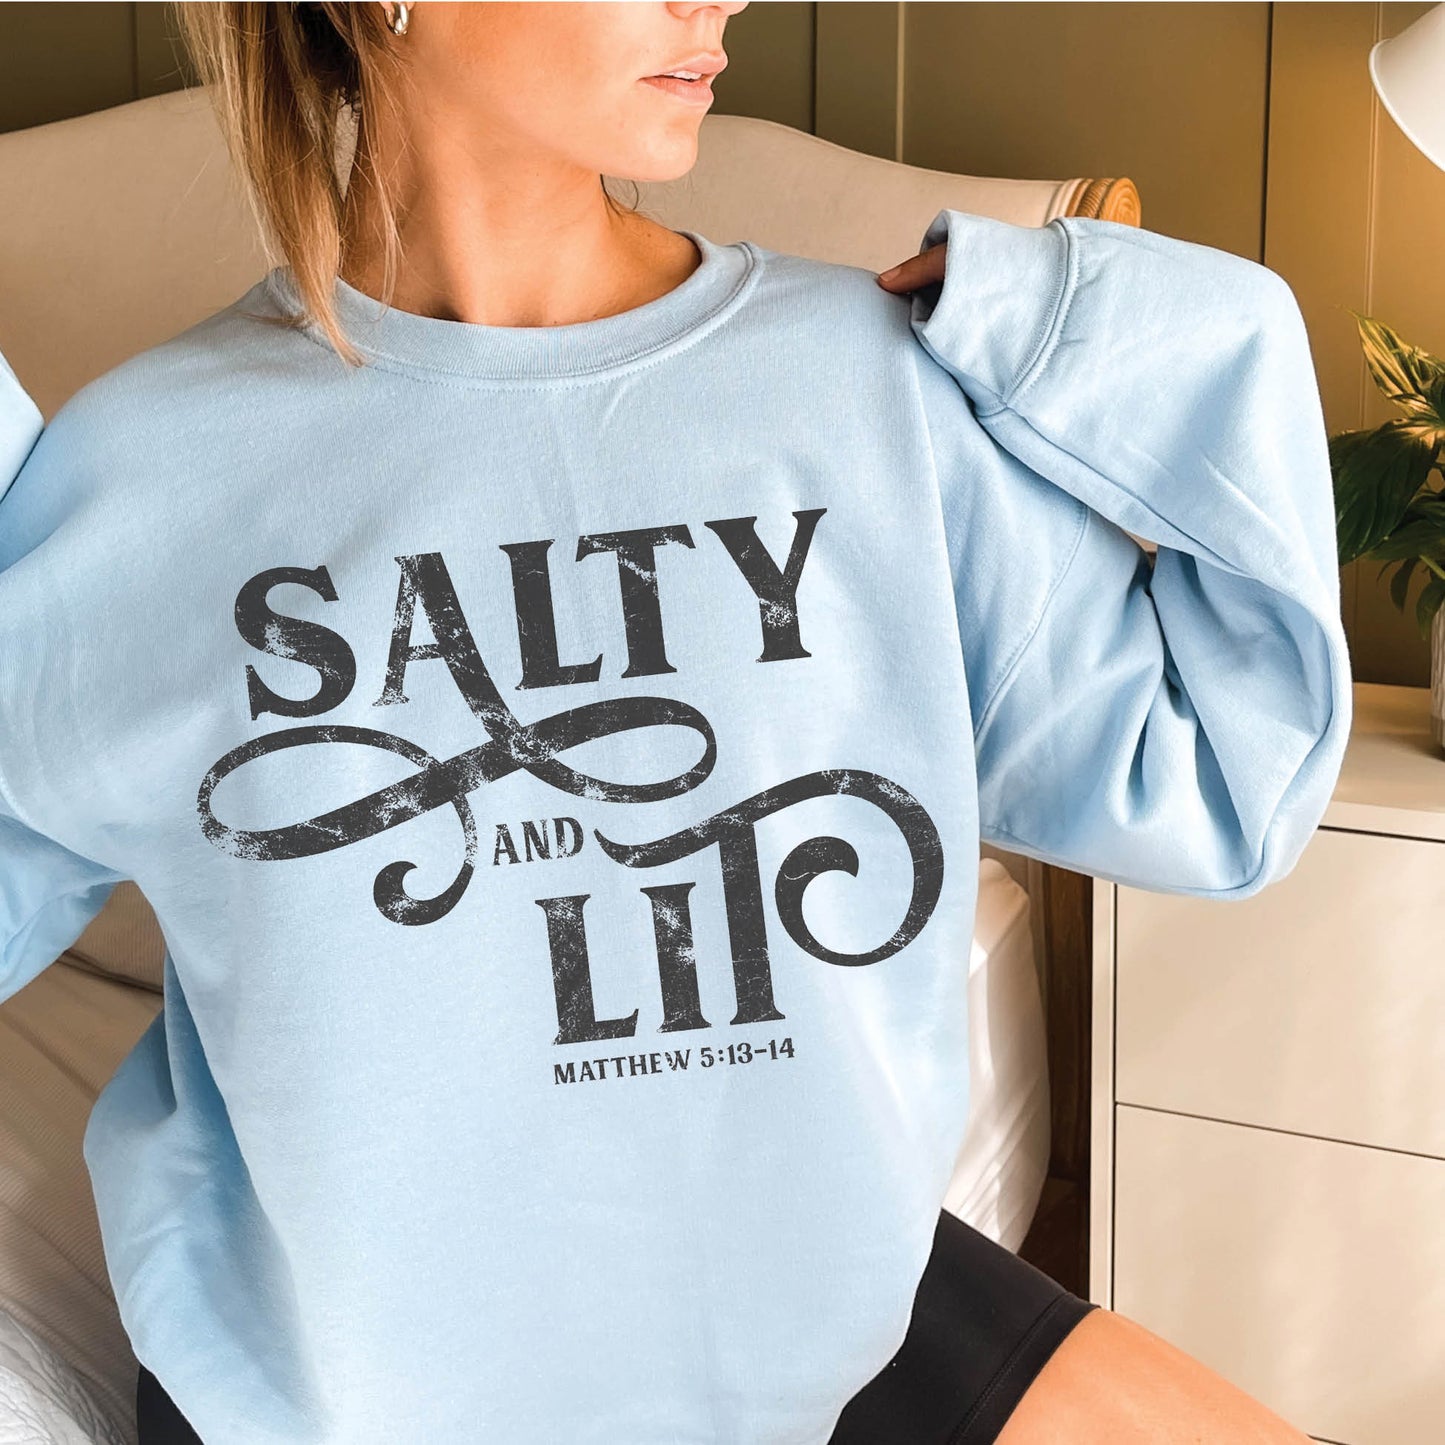 Woman wearing an oversized faith-based Salty And Lit Matthew 5:13-14 bible verse funny Christian aesthetic unisex crewneck sweatshirt with distressed swirl typography design printed in charcoal gray on cozy light blue sweater for women